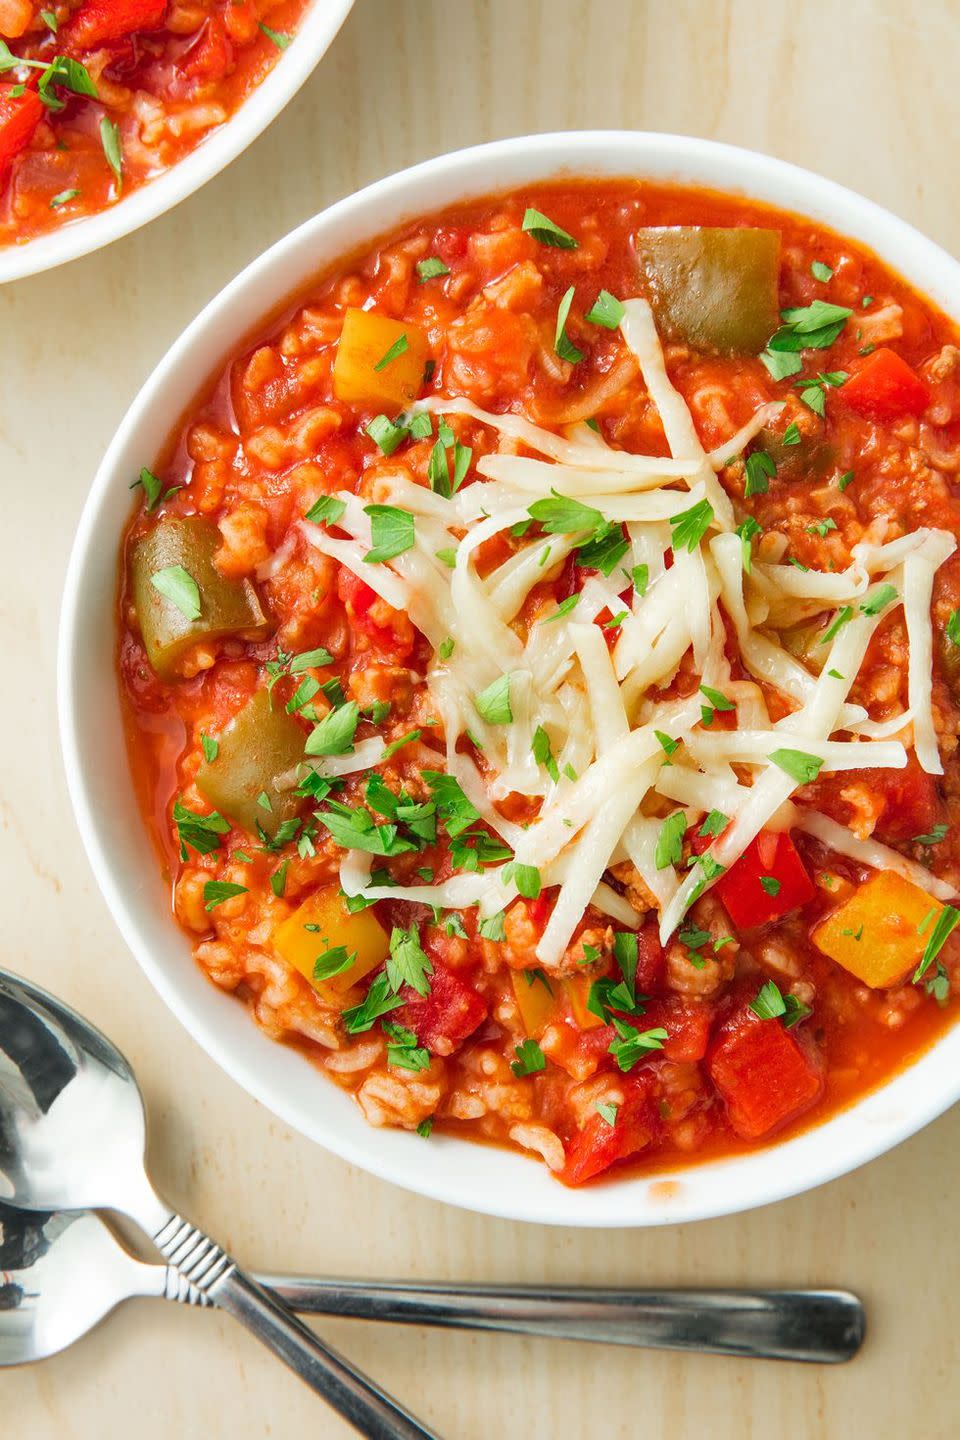 <p>This soup has everything you like about a <a href="https://www.delish.com/cooking/recipe-ideas/a23014857/classic-stuffed-peppers-recipe/" rel="nofollow noopener" target="_blank" data-ylk="slk:classic stuffed pepper" class="link ">classic stuffed pepper</a>—ground beef, rice, tomatoes, and CHEESE. It's perfect on its own or served with <a href="https://www.delish.com/cooking/recipe-ideas/a20079535/best-homemade-cornbread-recipe/" rel="nofollow noopener" target="_blank" data-ylk="slk:homemade cornbread" class="link ">homemade cornbread</a> or a <a href="https://www.delish.com/cooking/recipe-ideas/g2877/summer-salads/" rel="nofollow noopener" target="_blank" data-ylk="slk:summer salad" class="link ">summer salad</a>.</p><p>Get the <strong><a href="https://www.delish.com/cooking/recipe-ideas/a21925560/best-stuffed-bell-pepper-soup-recipe/" rel="nofollow noopener" target="_blank" data-ylk="slk:Stuffed Pepper Soup recipe" class="link ">Stuffed Pepper Soup recipe</a></strong>.</p>